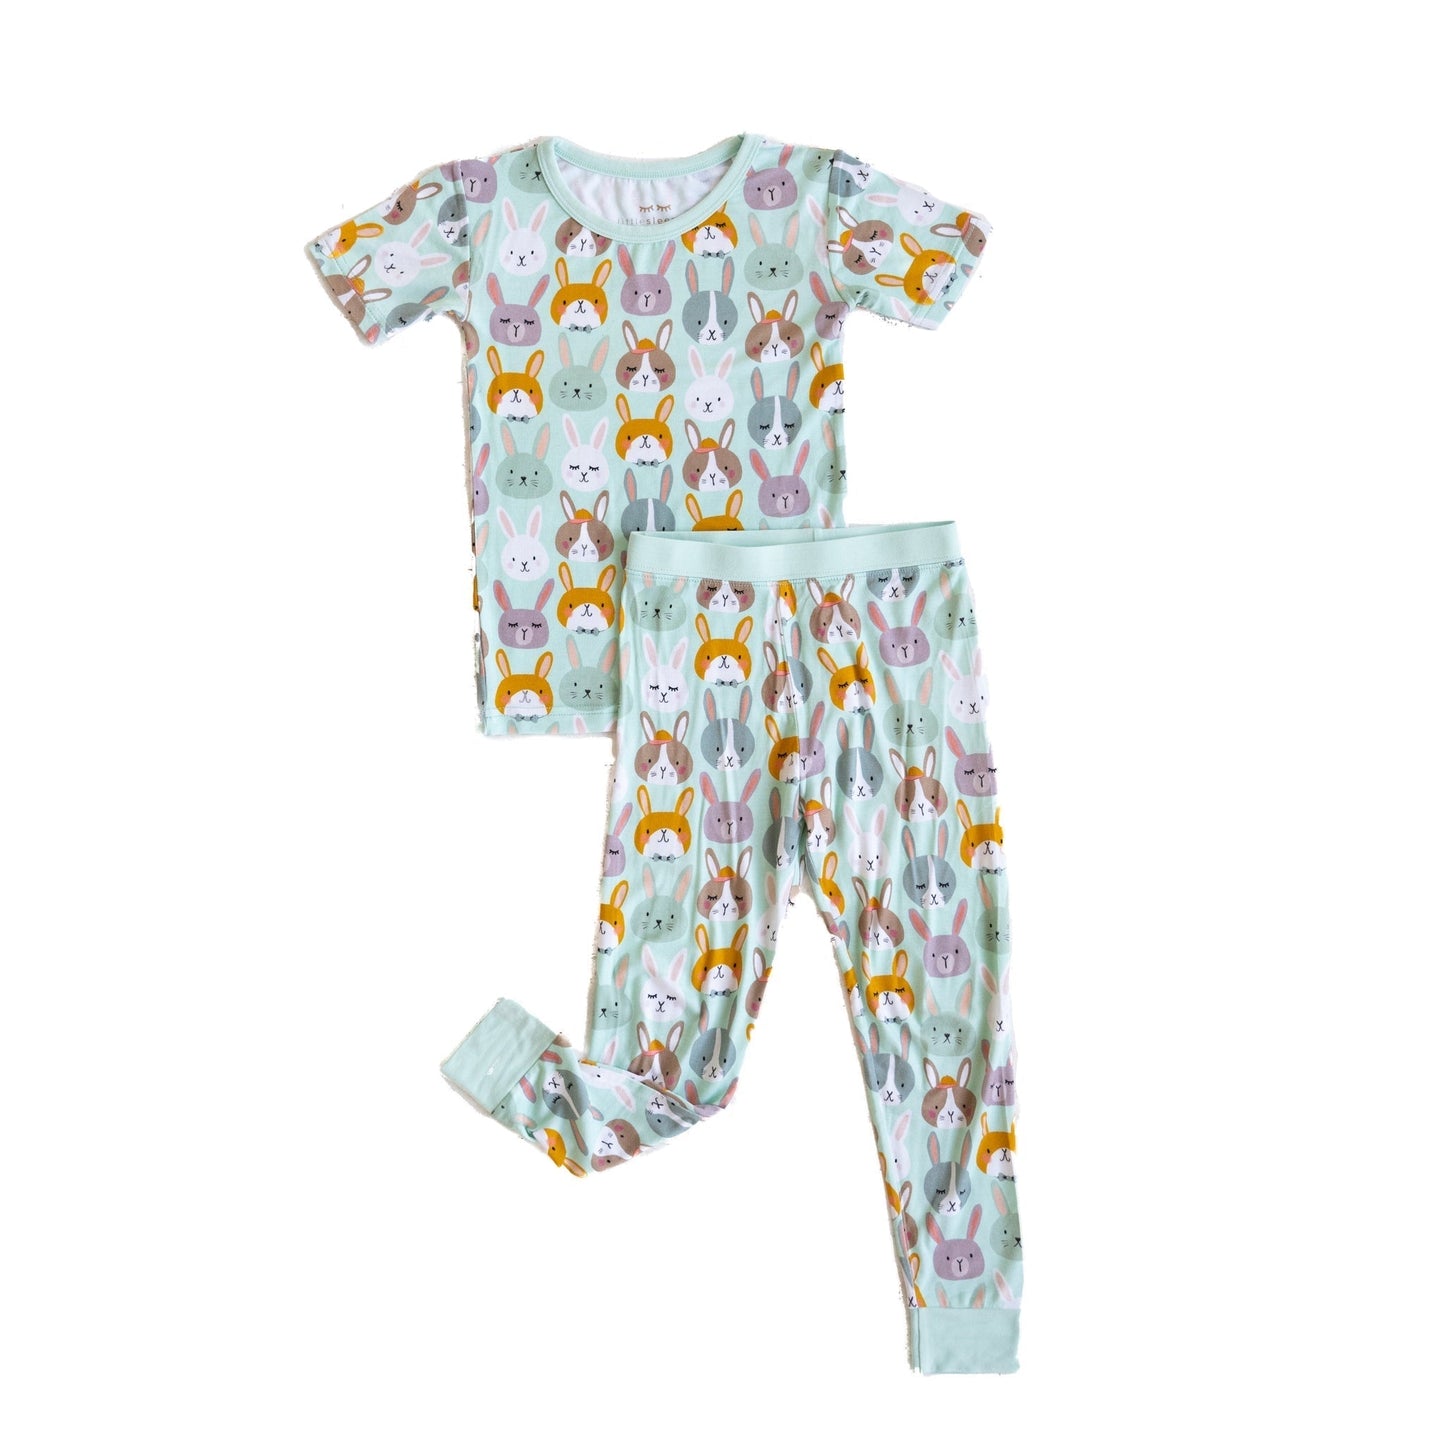 Rad Rabbits Two-Piece Short Sleeve Bamboo Viscose Pajama Set Tea for Three: A Children's Boutique